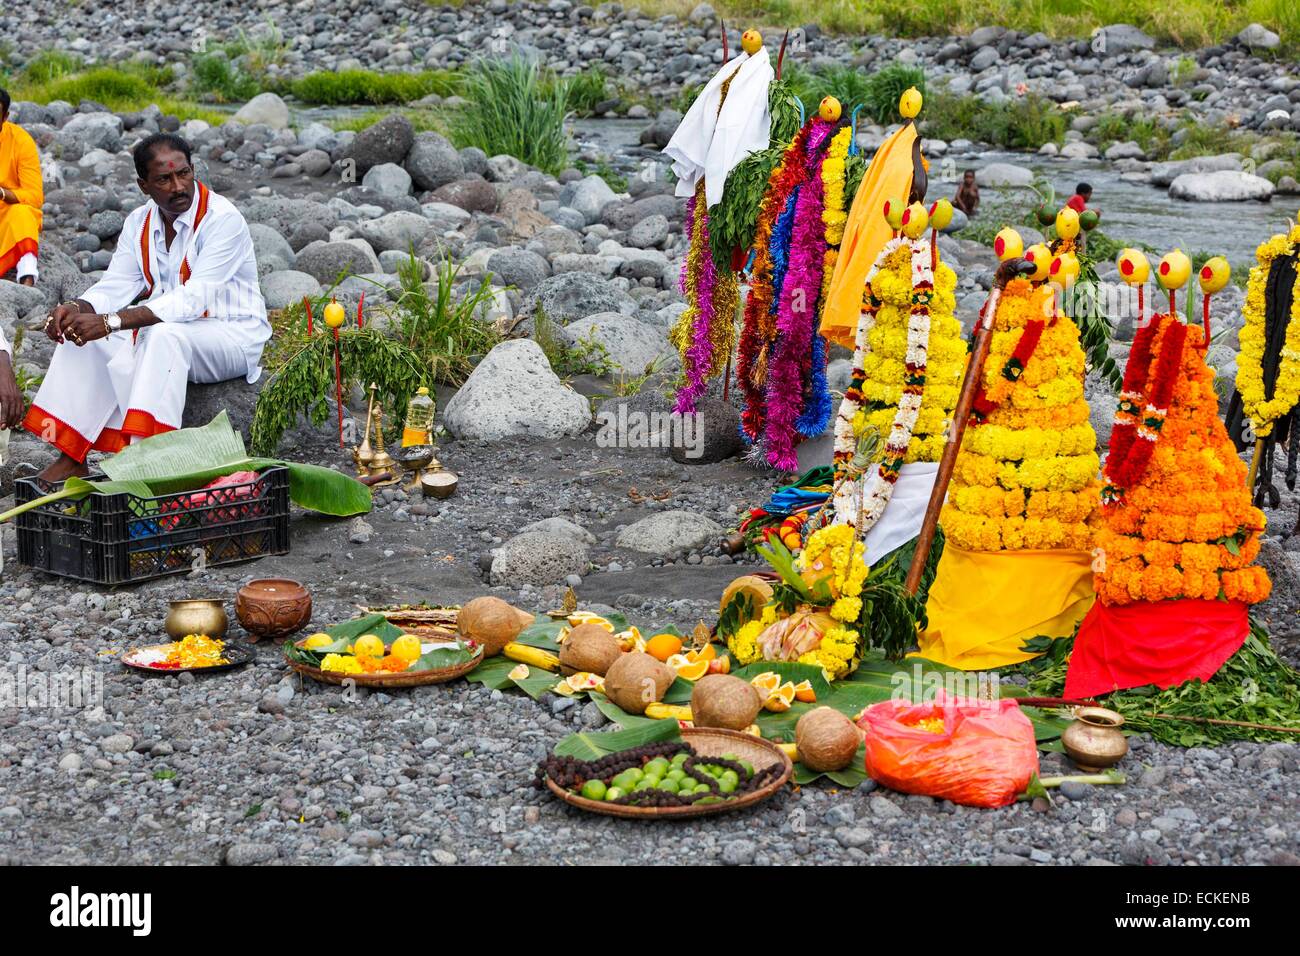 France, Reunion Island (French overseas department), Saint Pierre, Bois d'Olives, Saint Etienne river, cultures and traditions, rituals of preparation Tamil outdoor ceremony Stock Photo